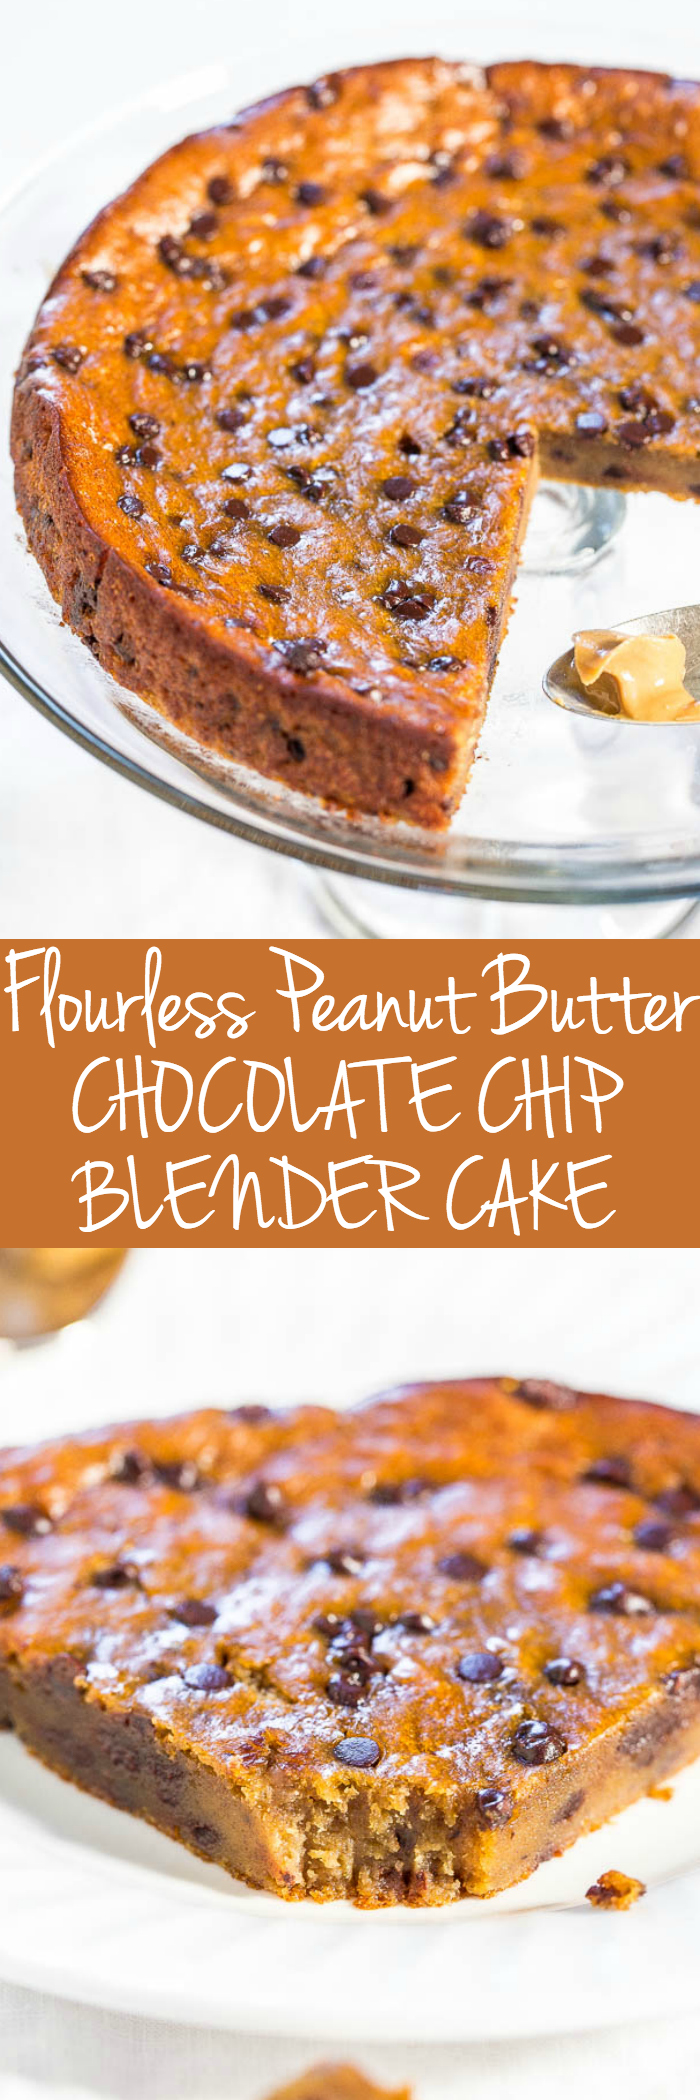 Flourless Peanut Butter Chocolate Chip Blender Cake - NO white sugar, NO oil, NO butter, NO flour! Made in a blender and the easiest cake ever!! You won't believe how amazing it tastes until you try it for yourself!!